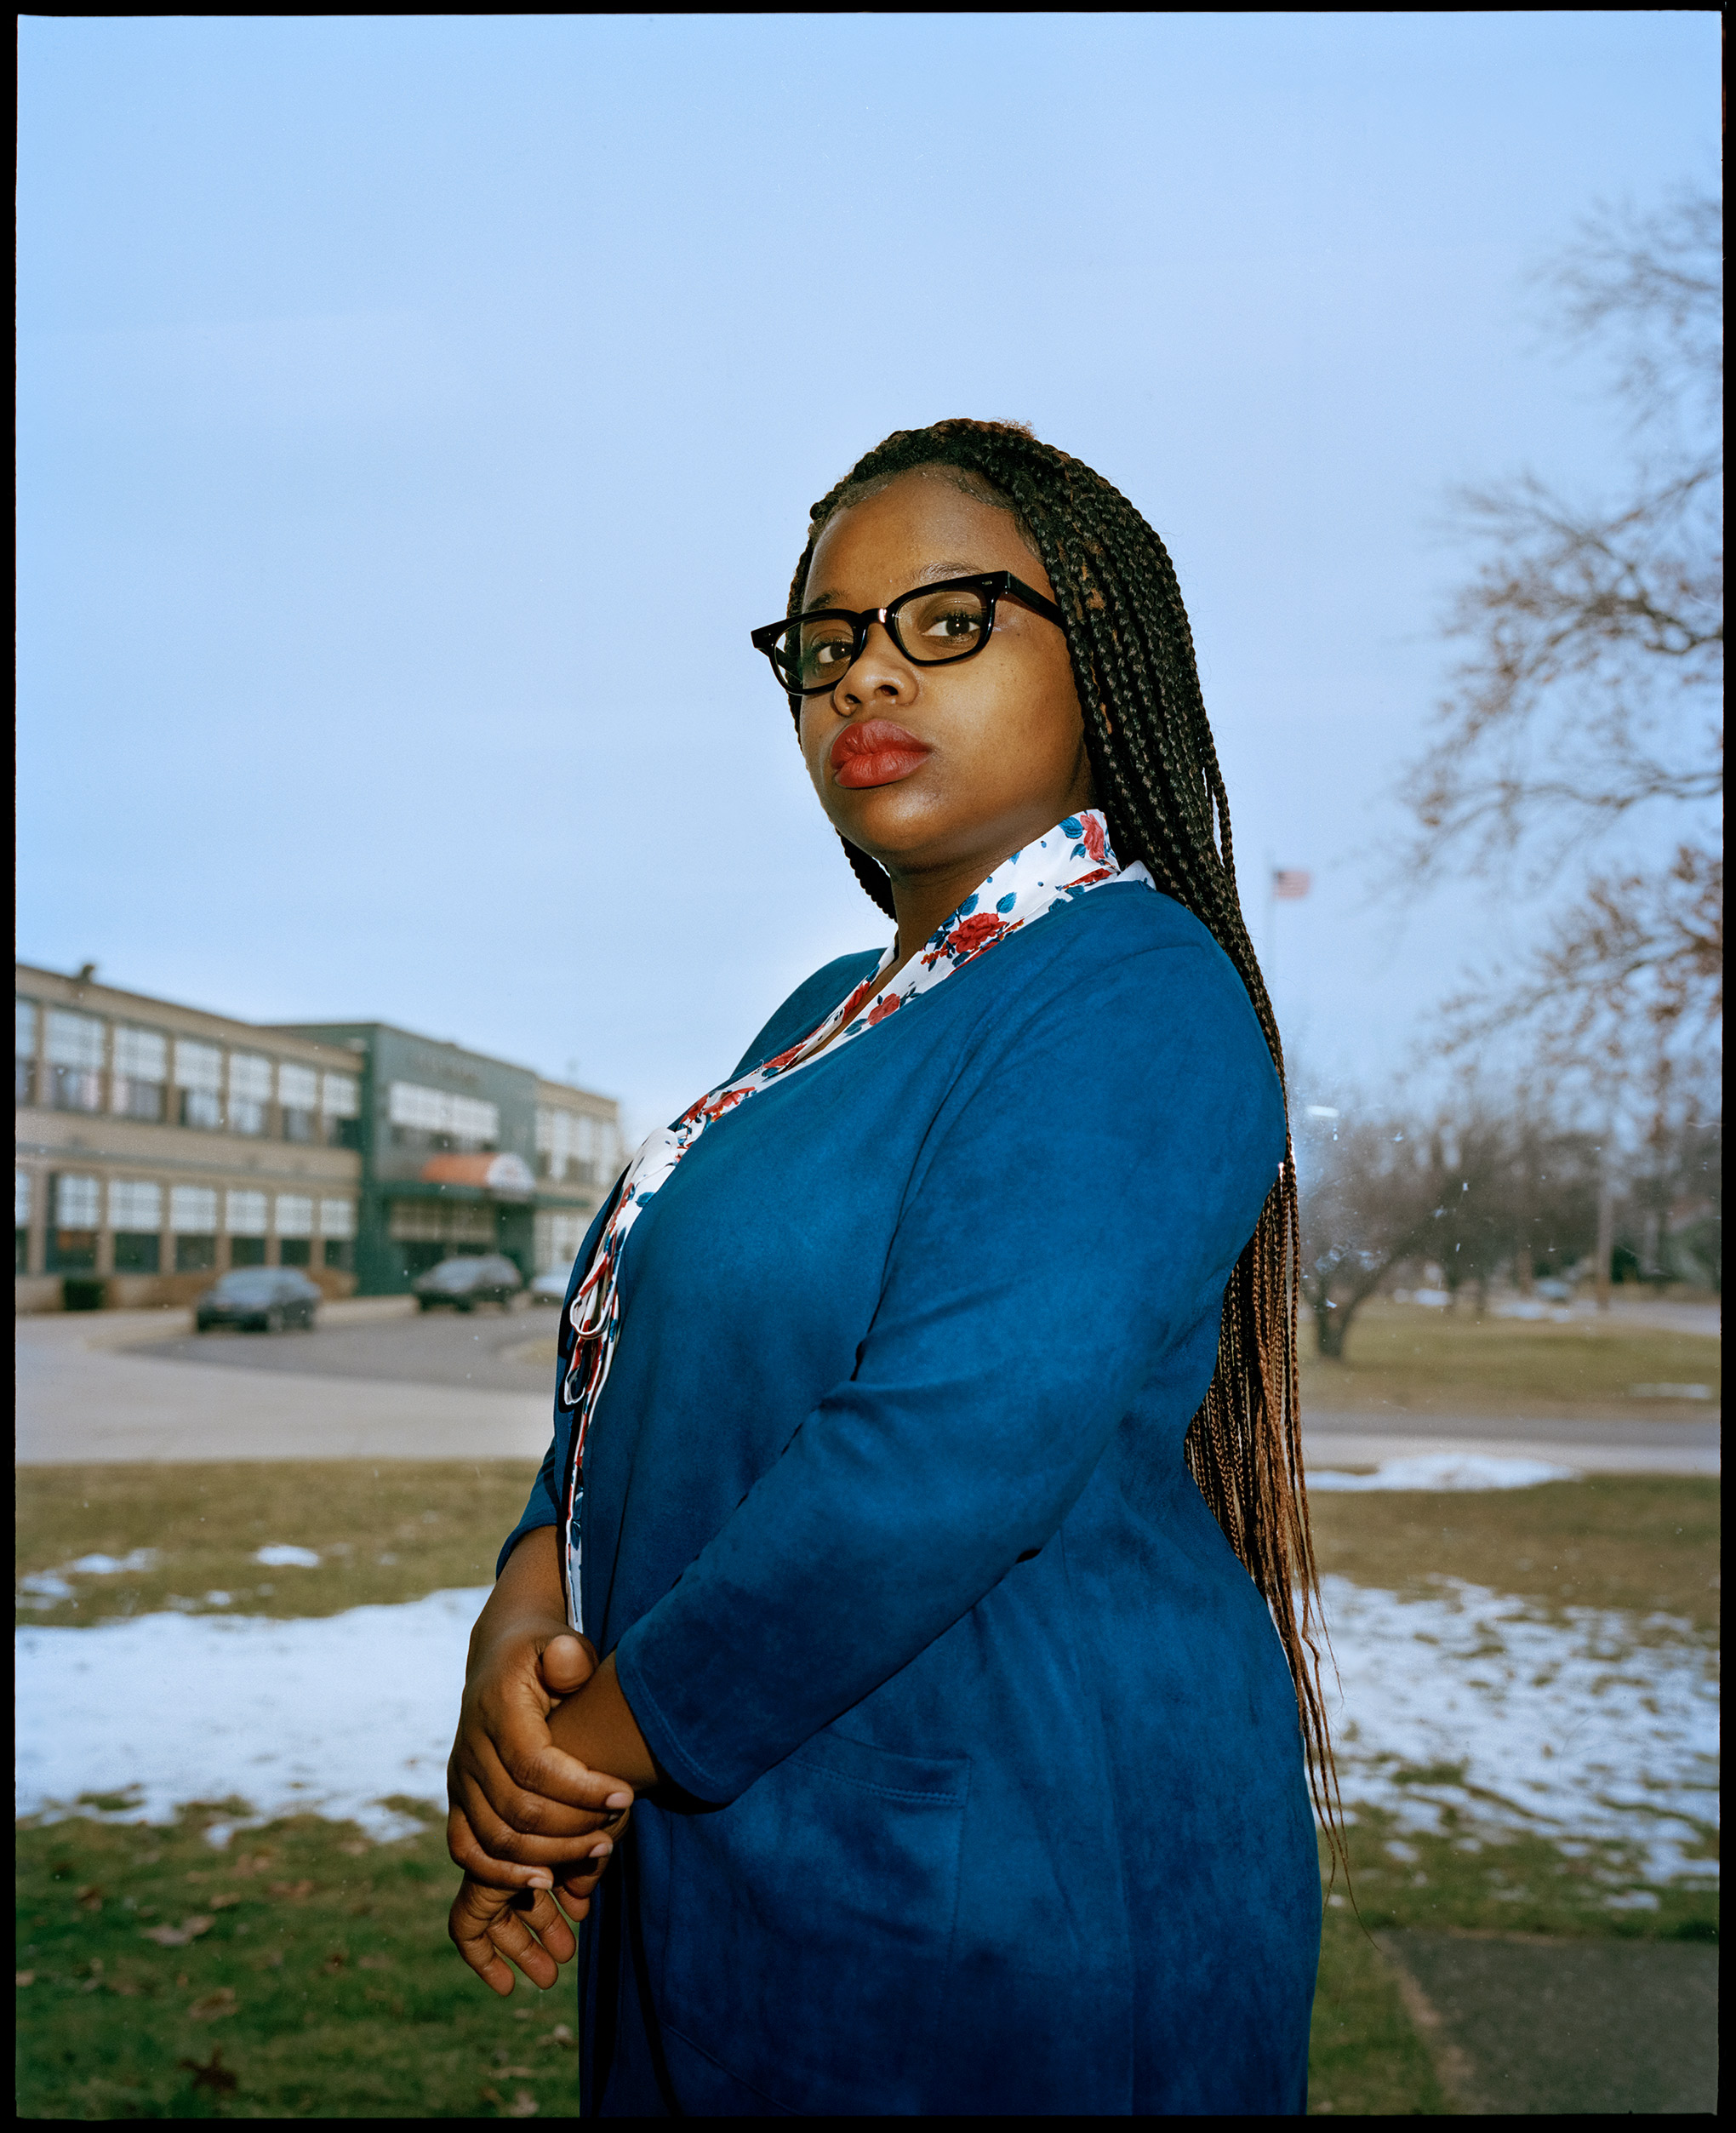 Benton Harbor resident Traci Burton, 25, helped promote a music video featuring high school students in which they called for the school debt to be forgiven and their education renewed. (Adeline Lulo for TIME)